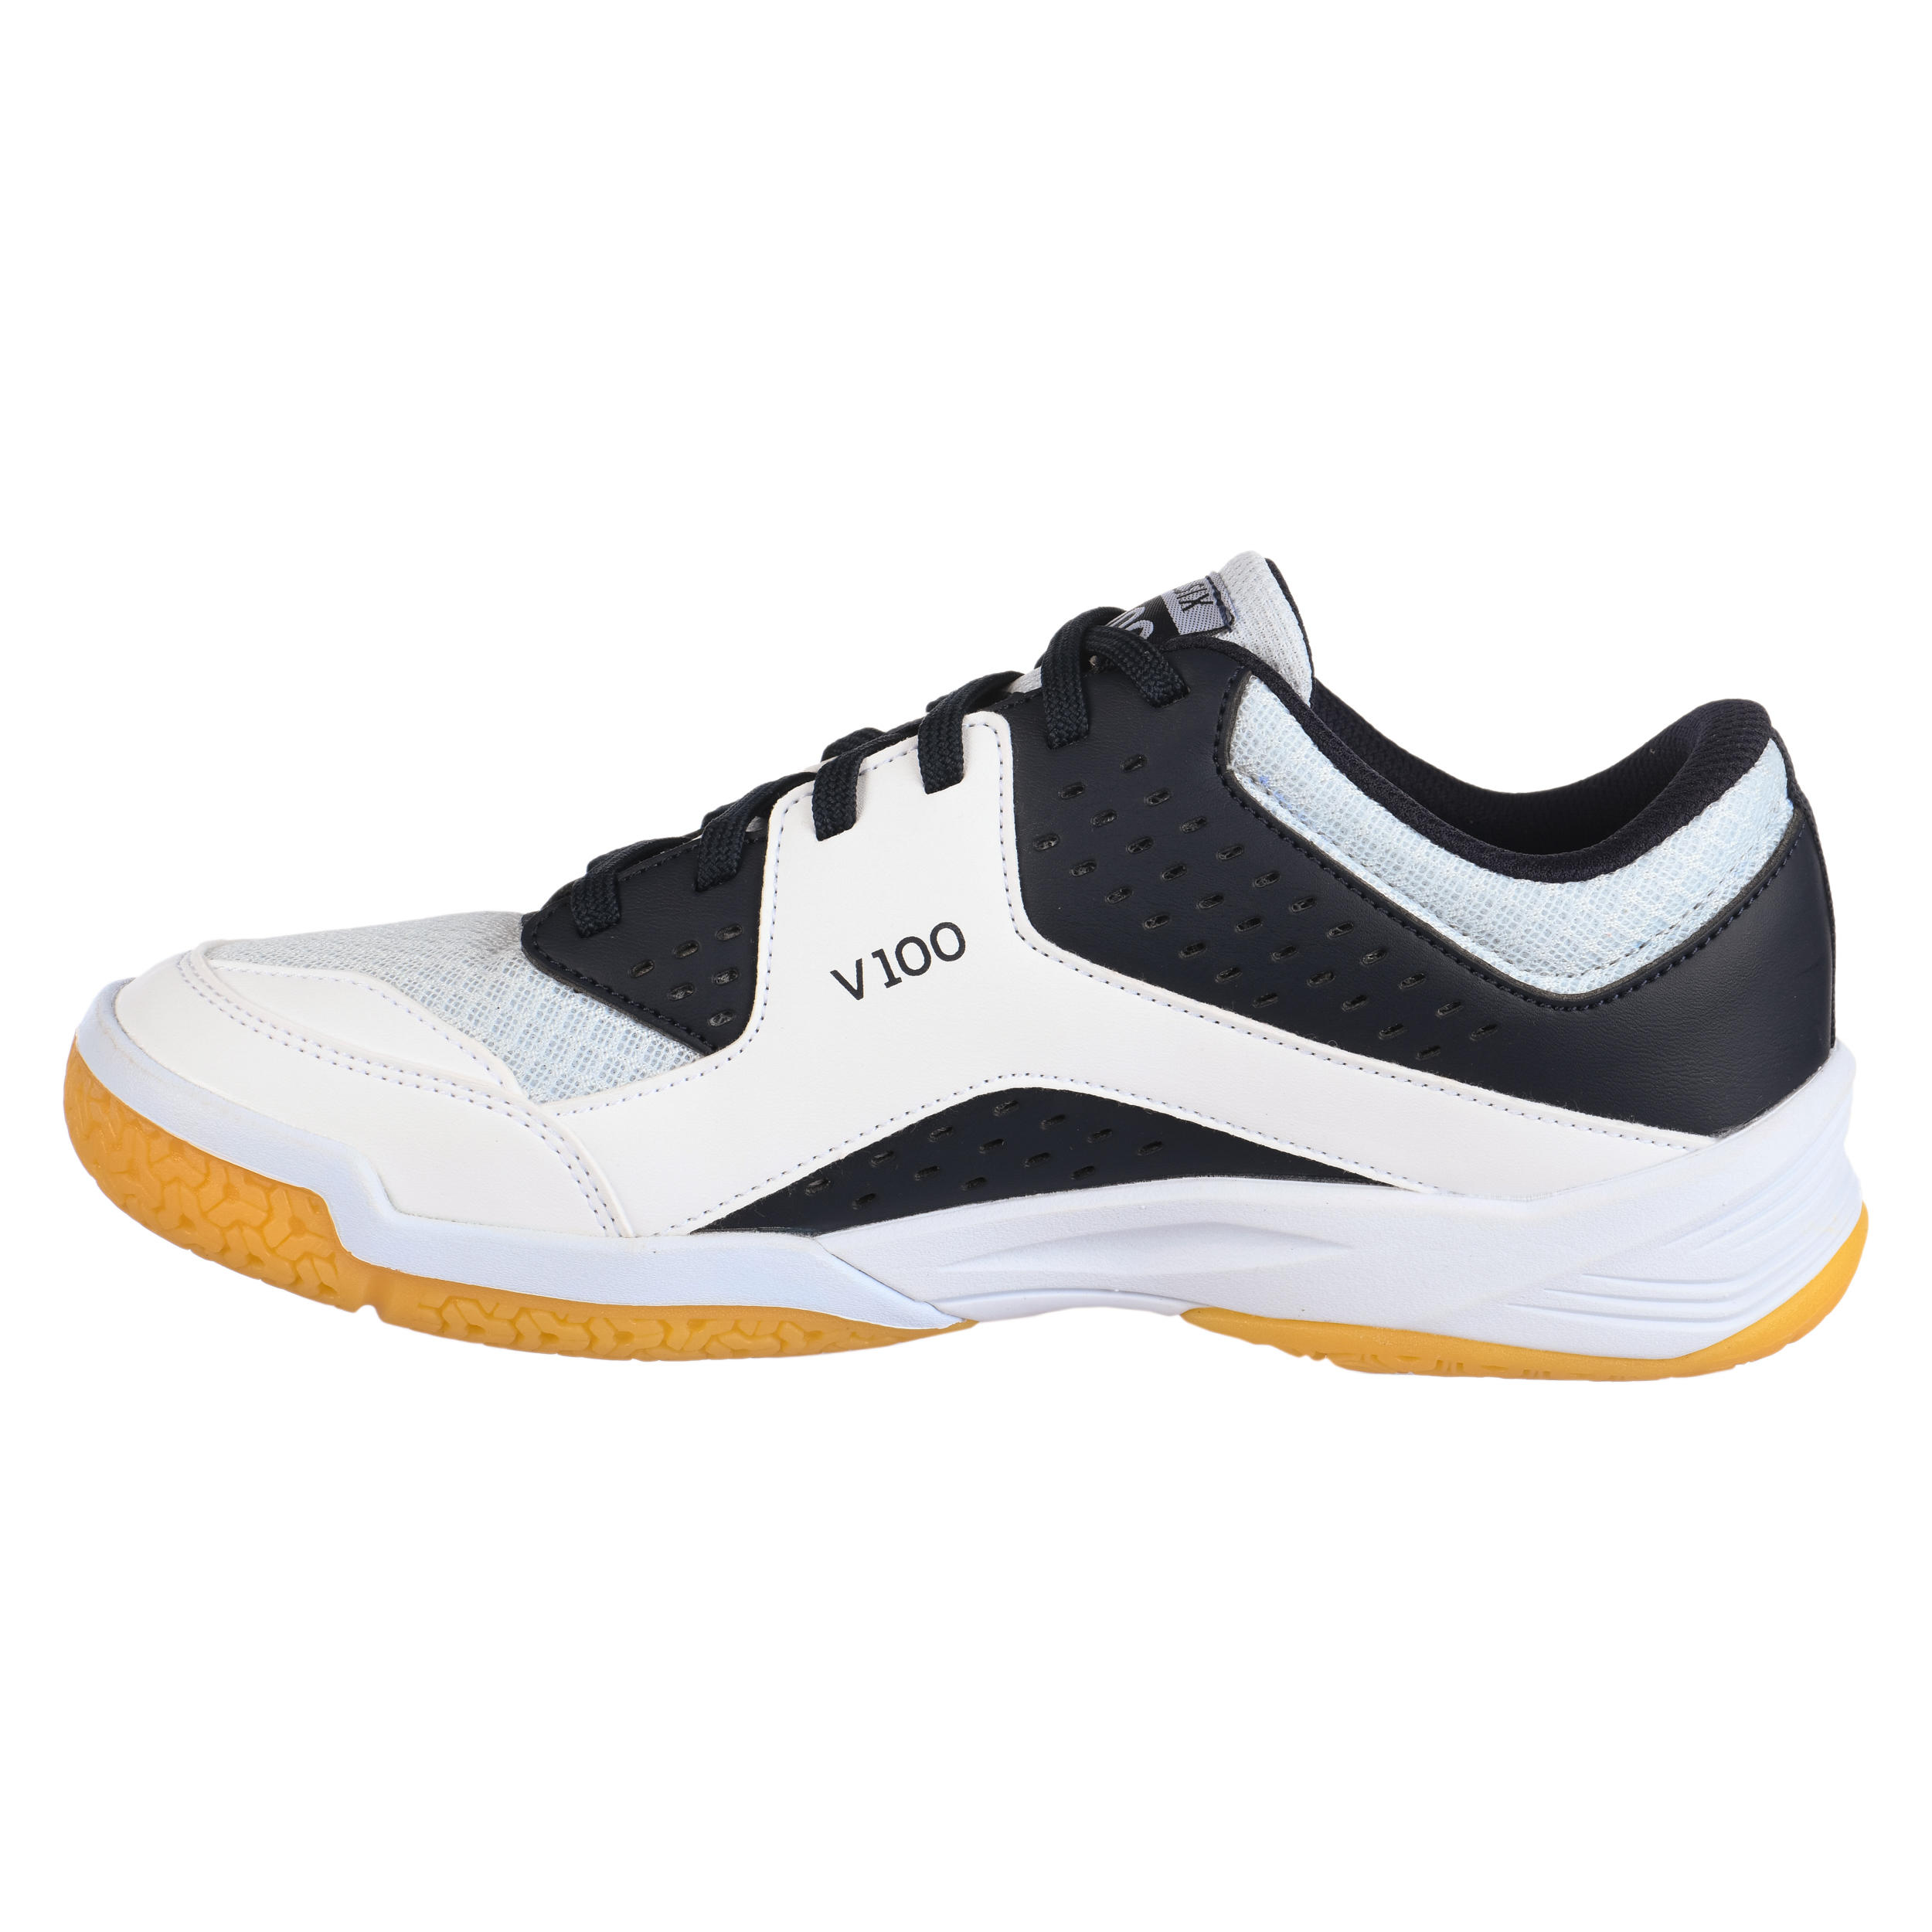 Women's Volleyball Shoes V100 - White/Blue/Grey 9/9